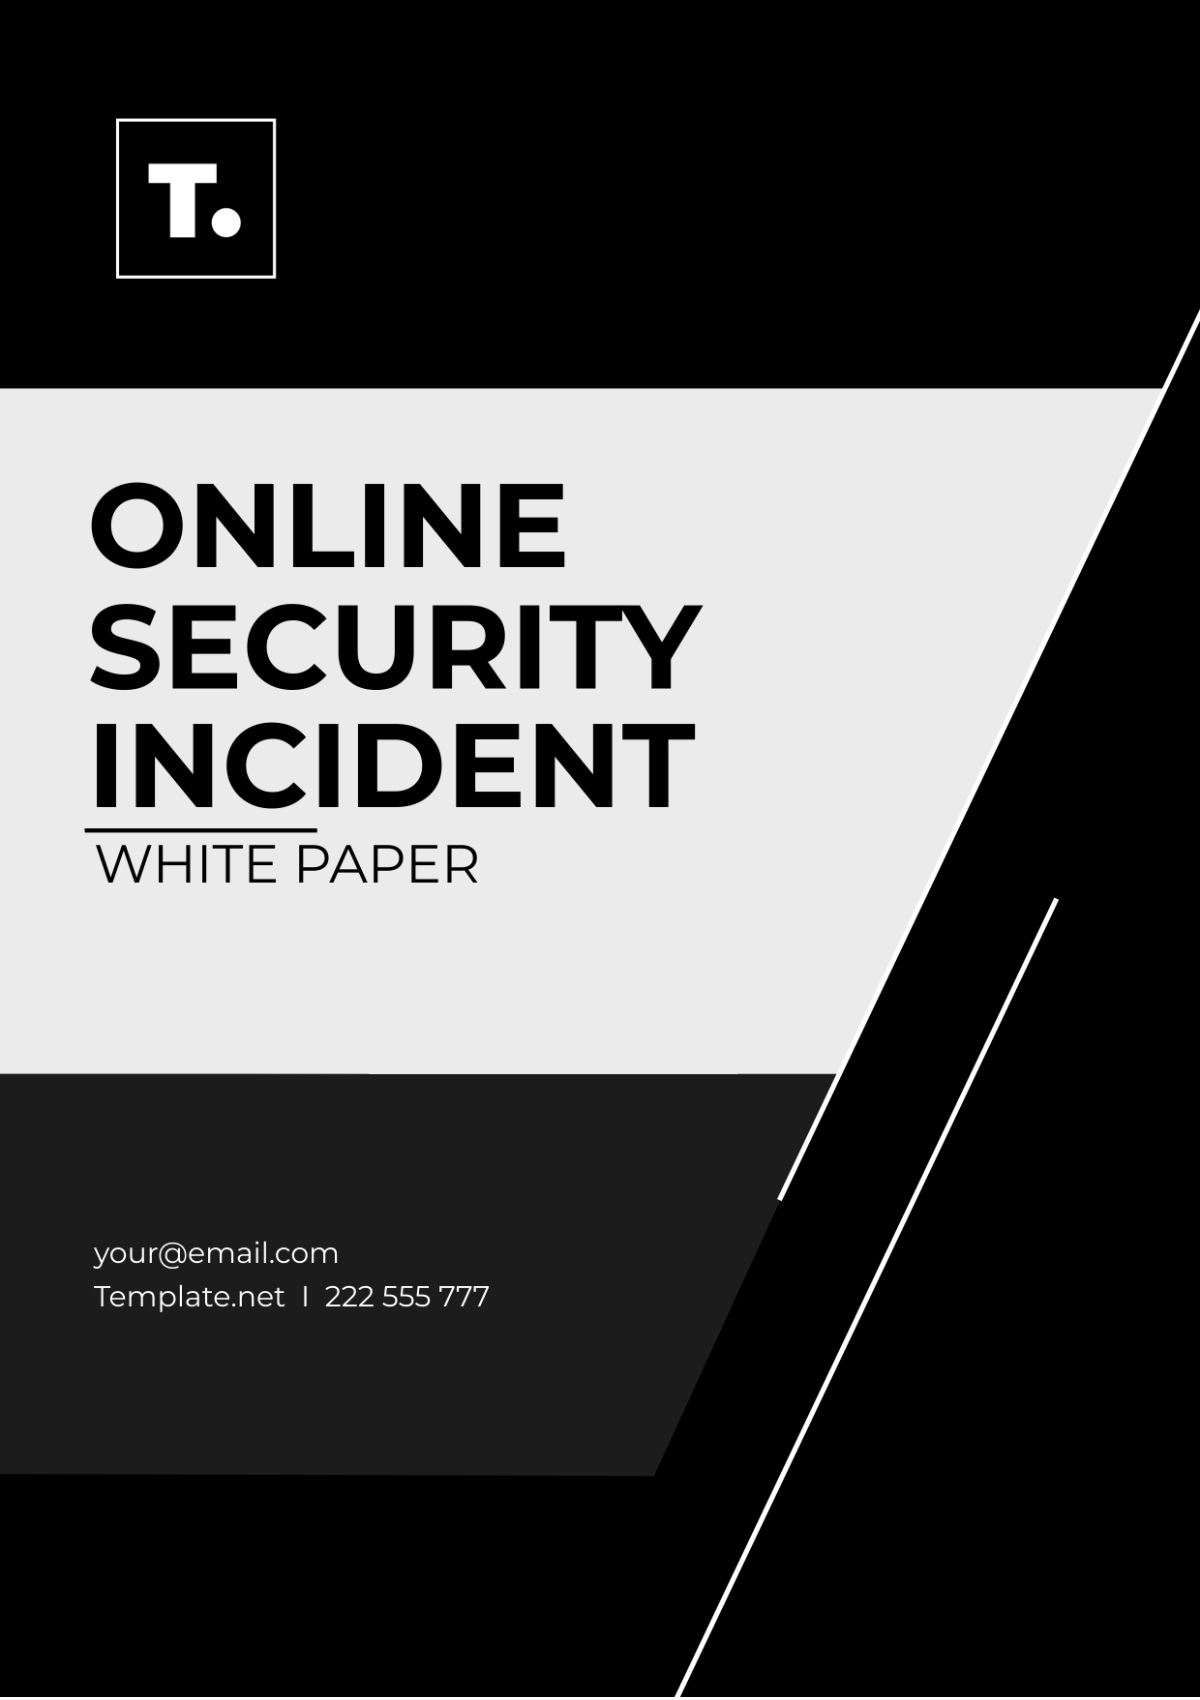 Online Security Incident White Paper Template